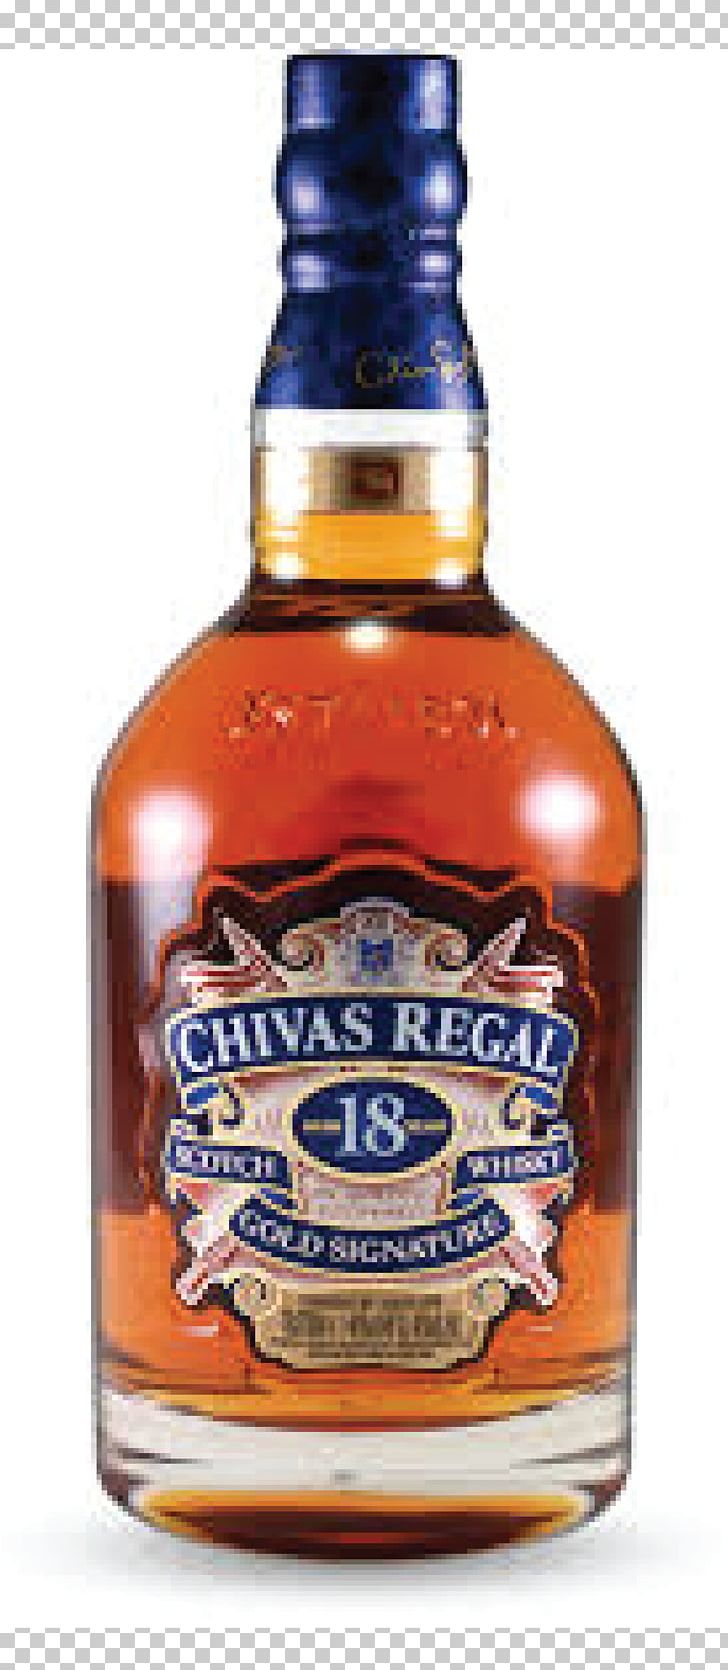 Chivas Regal Scotch Whisky Blended Whiskey Single Malt Whisky PNG, Clipart, Alcoholic Beverage, Blended Malt Whisky, Blended Whiskey, Bottle, Brennerei Free PNG Download